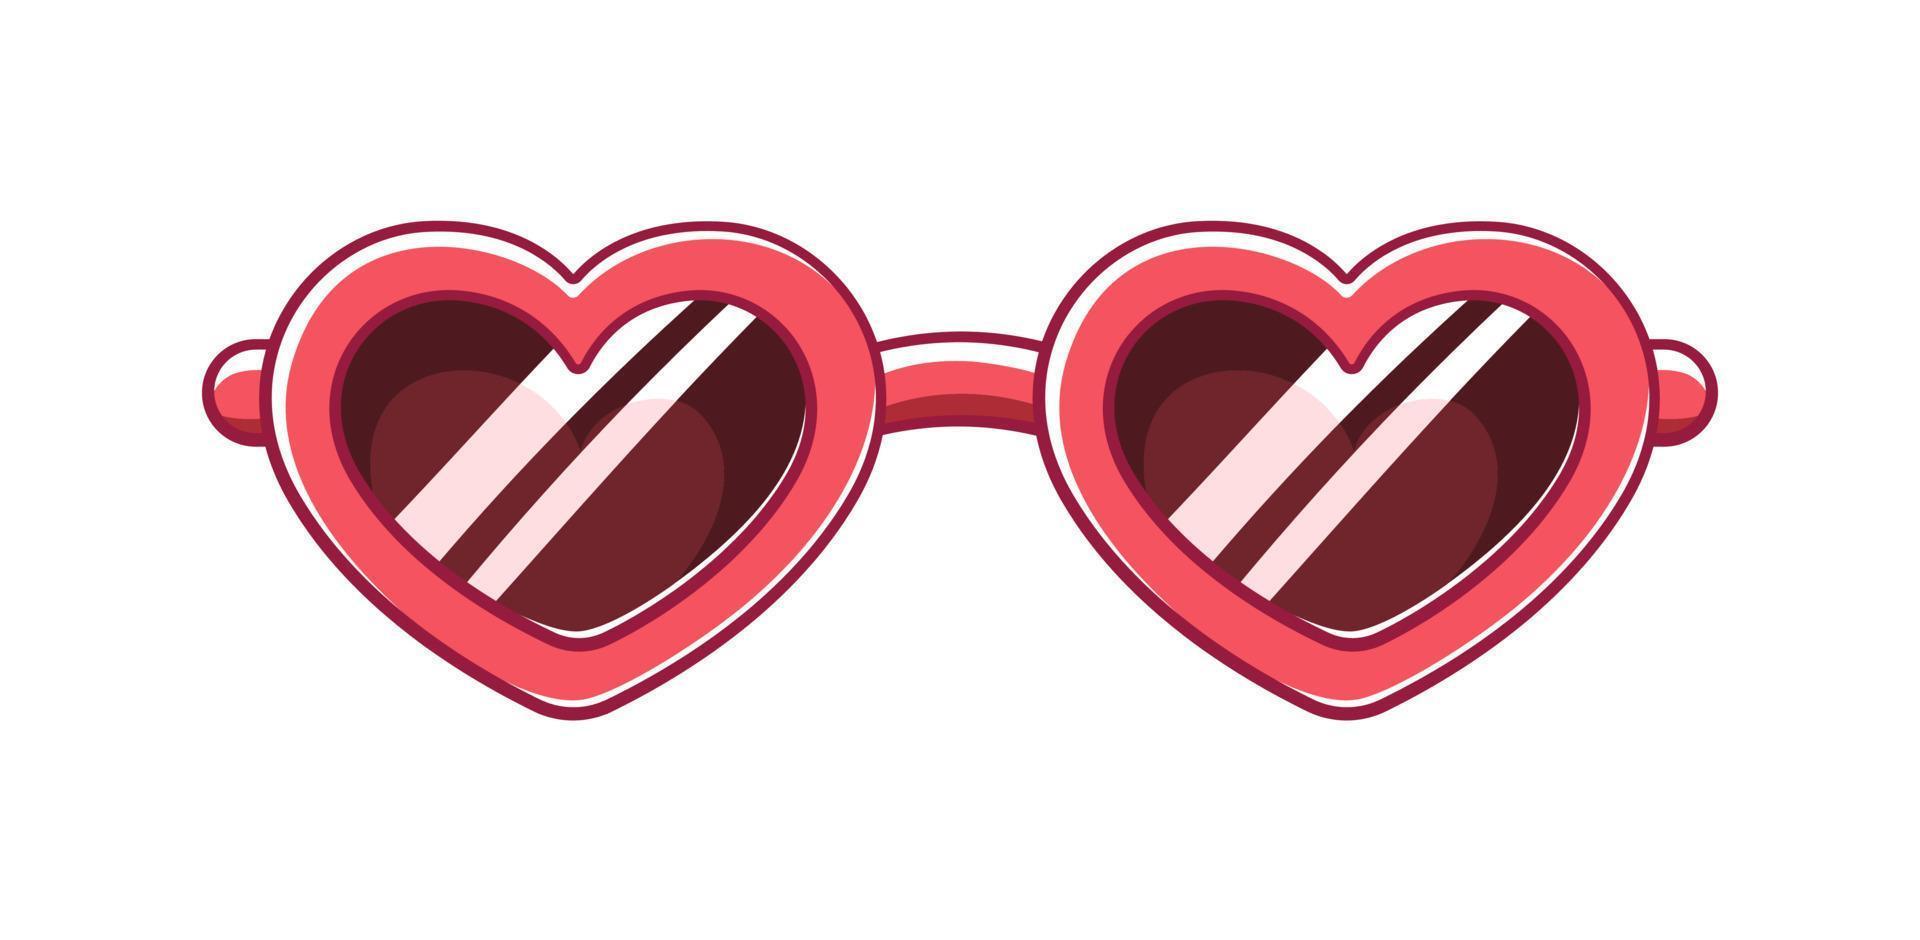 Red heart shaped sunglasses clipart. Funky party glasses eyewear cartoon vector illustration.